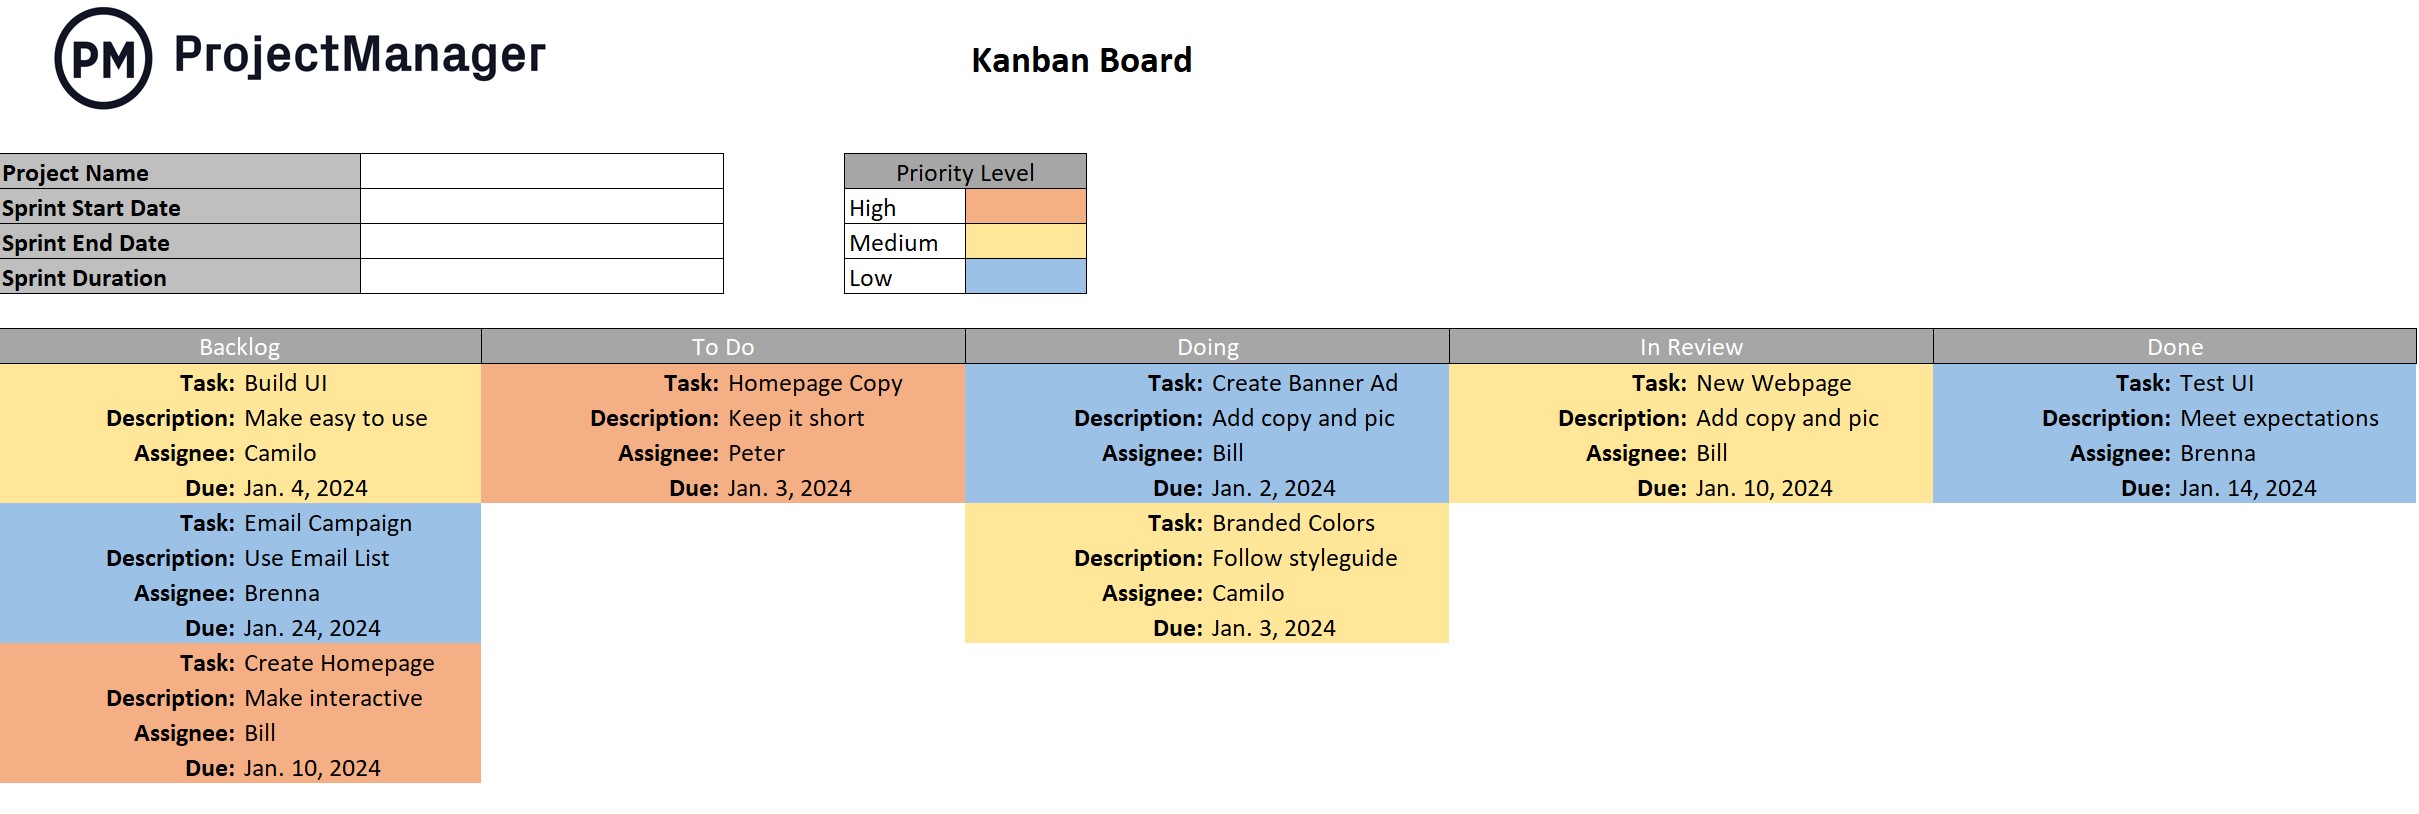 ProjectManager's kanban board template for Excel.